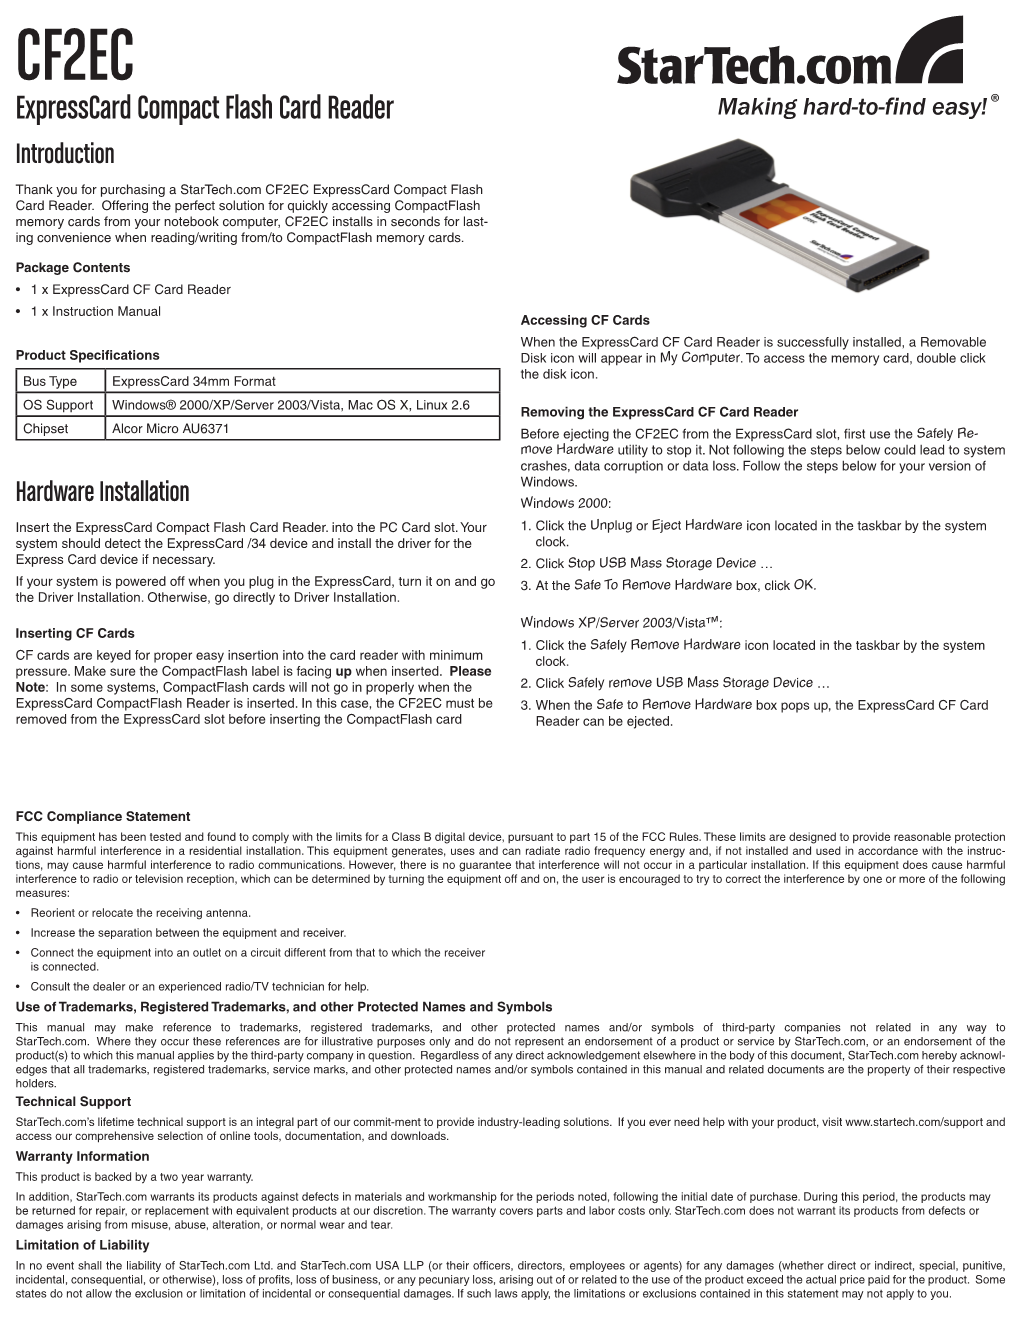 Expresscard Compact Flash Card Reader Introduction